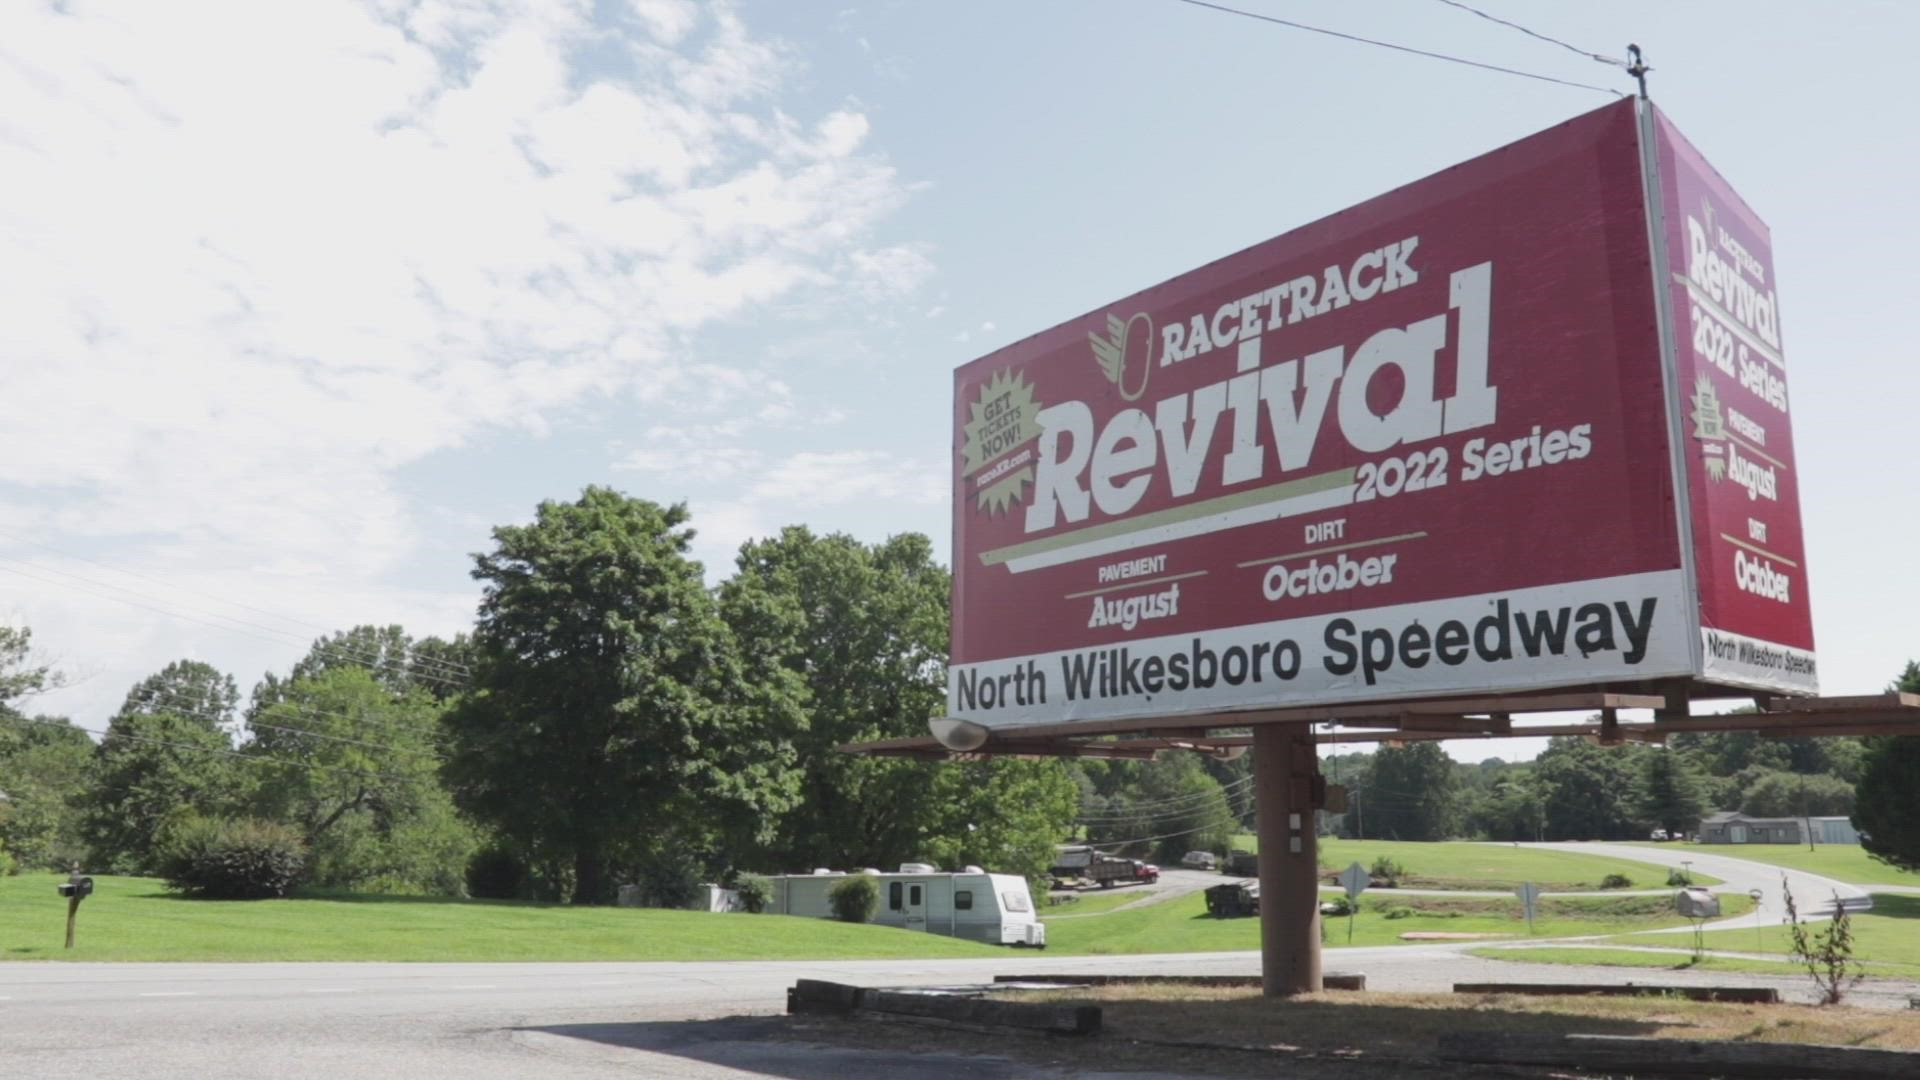 North Wilkesboro Speedway was once figured a lost cause, a relic from NASCAR's ancient past. But thanks to a grassroots effort, the track is back in the spotlight.